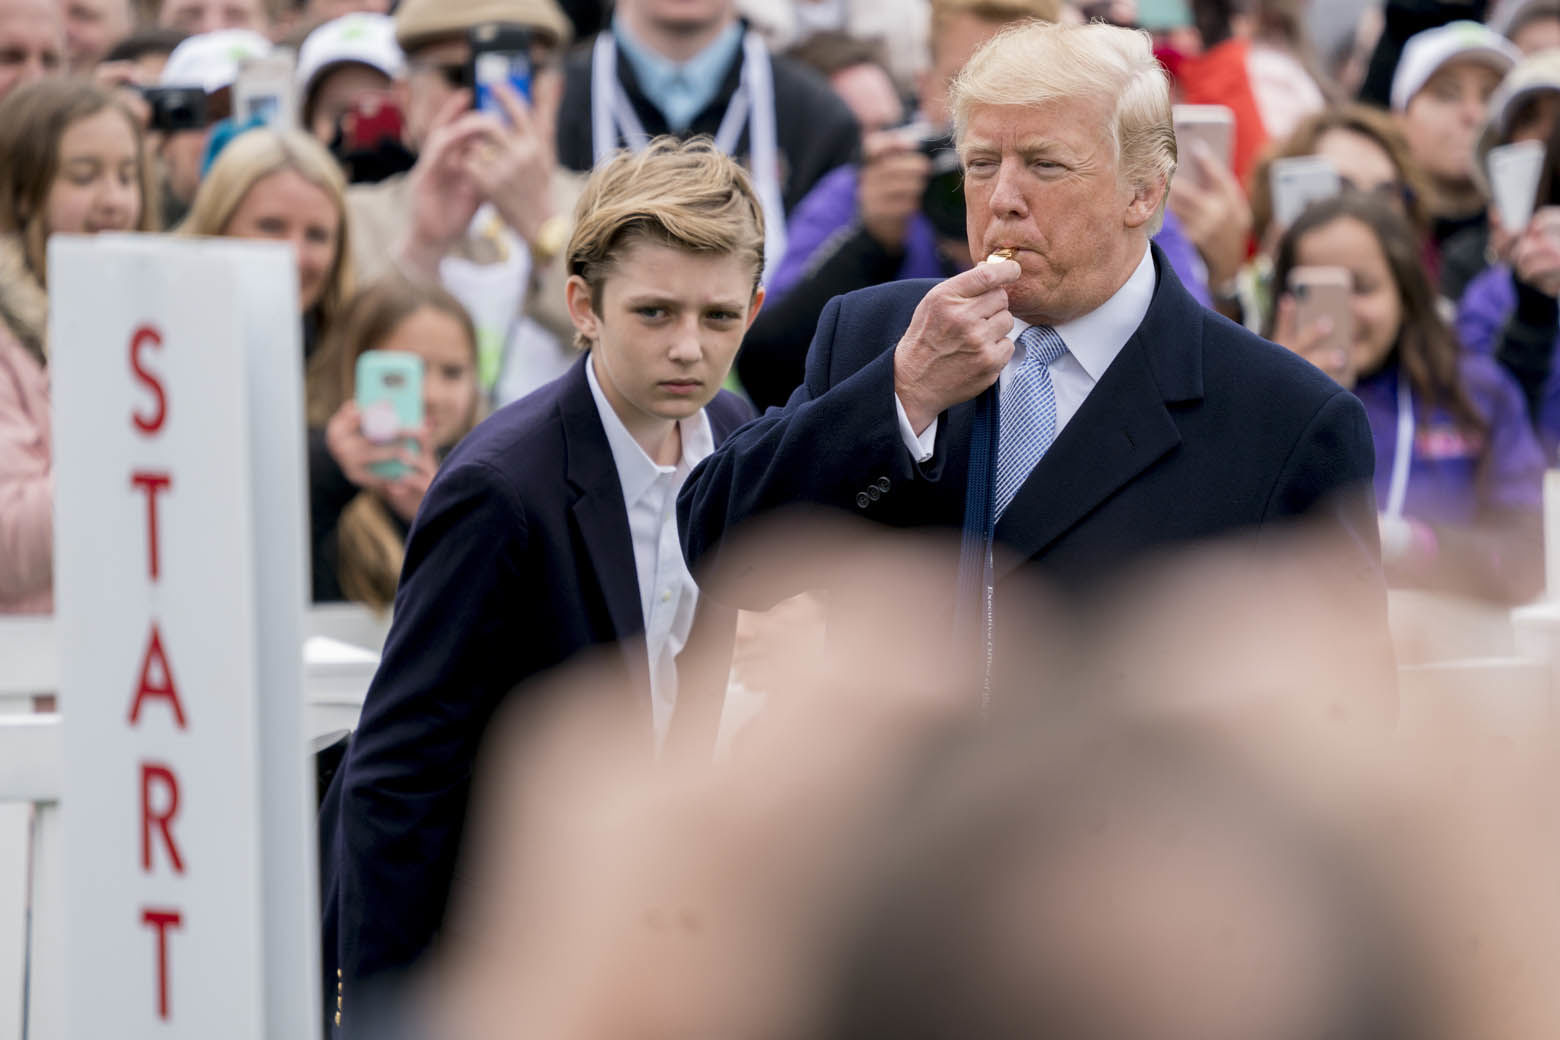 President Donald Trump, accompanied by his son Barron Trump, left, blows a whistle to start a race at the annual White House Easter Egg Roll on the South Lawn of the White House in Washington, Monday, April 2, 2018. (AP Photo/Andrew Harnik)